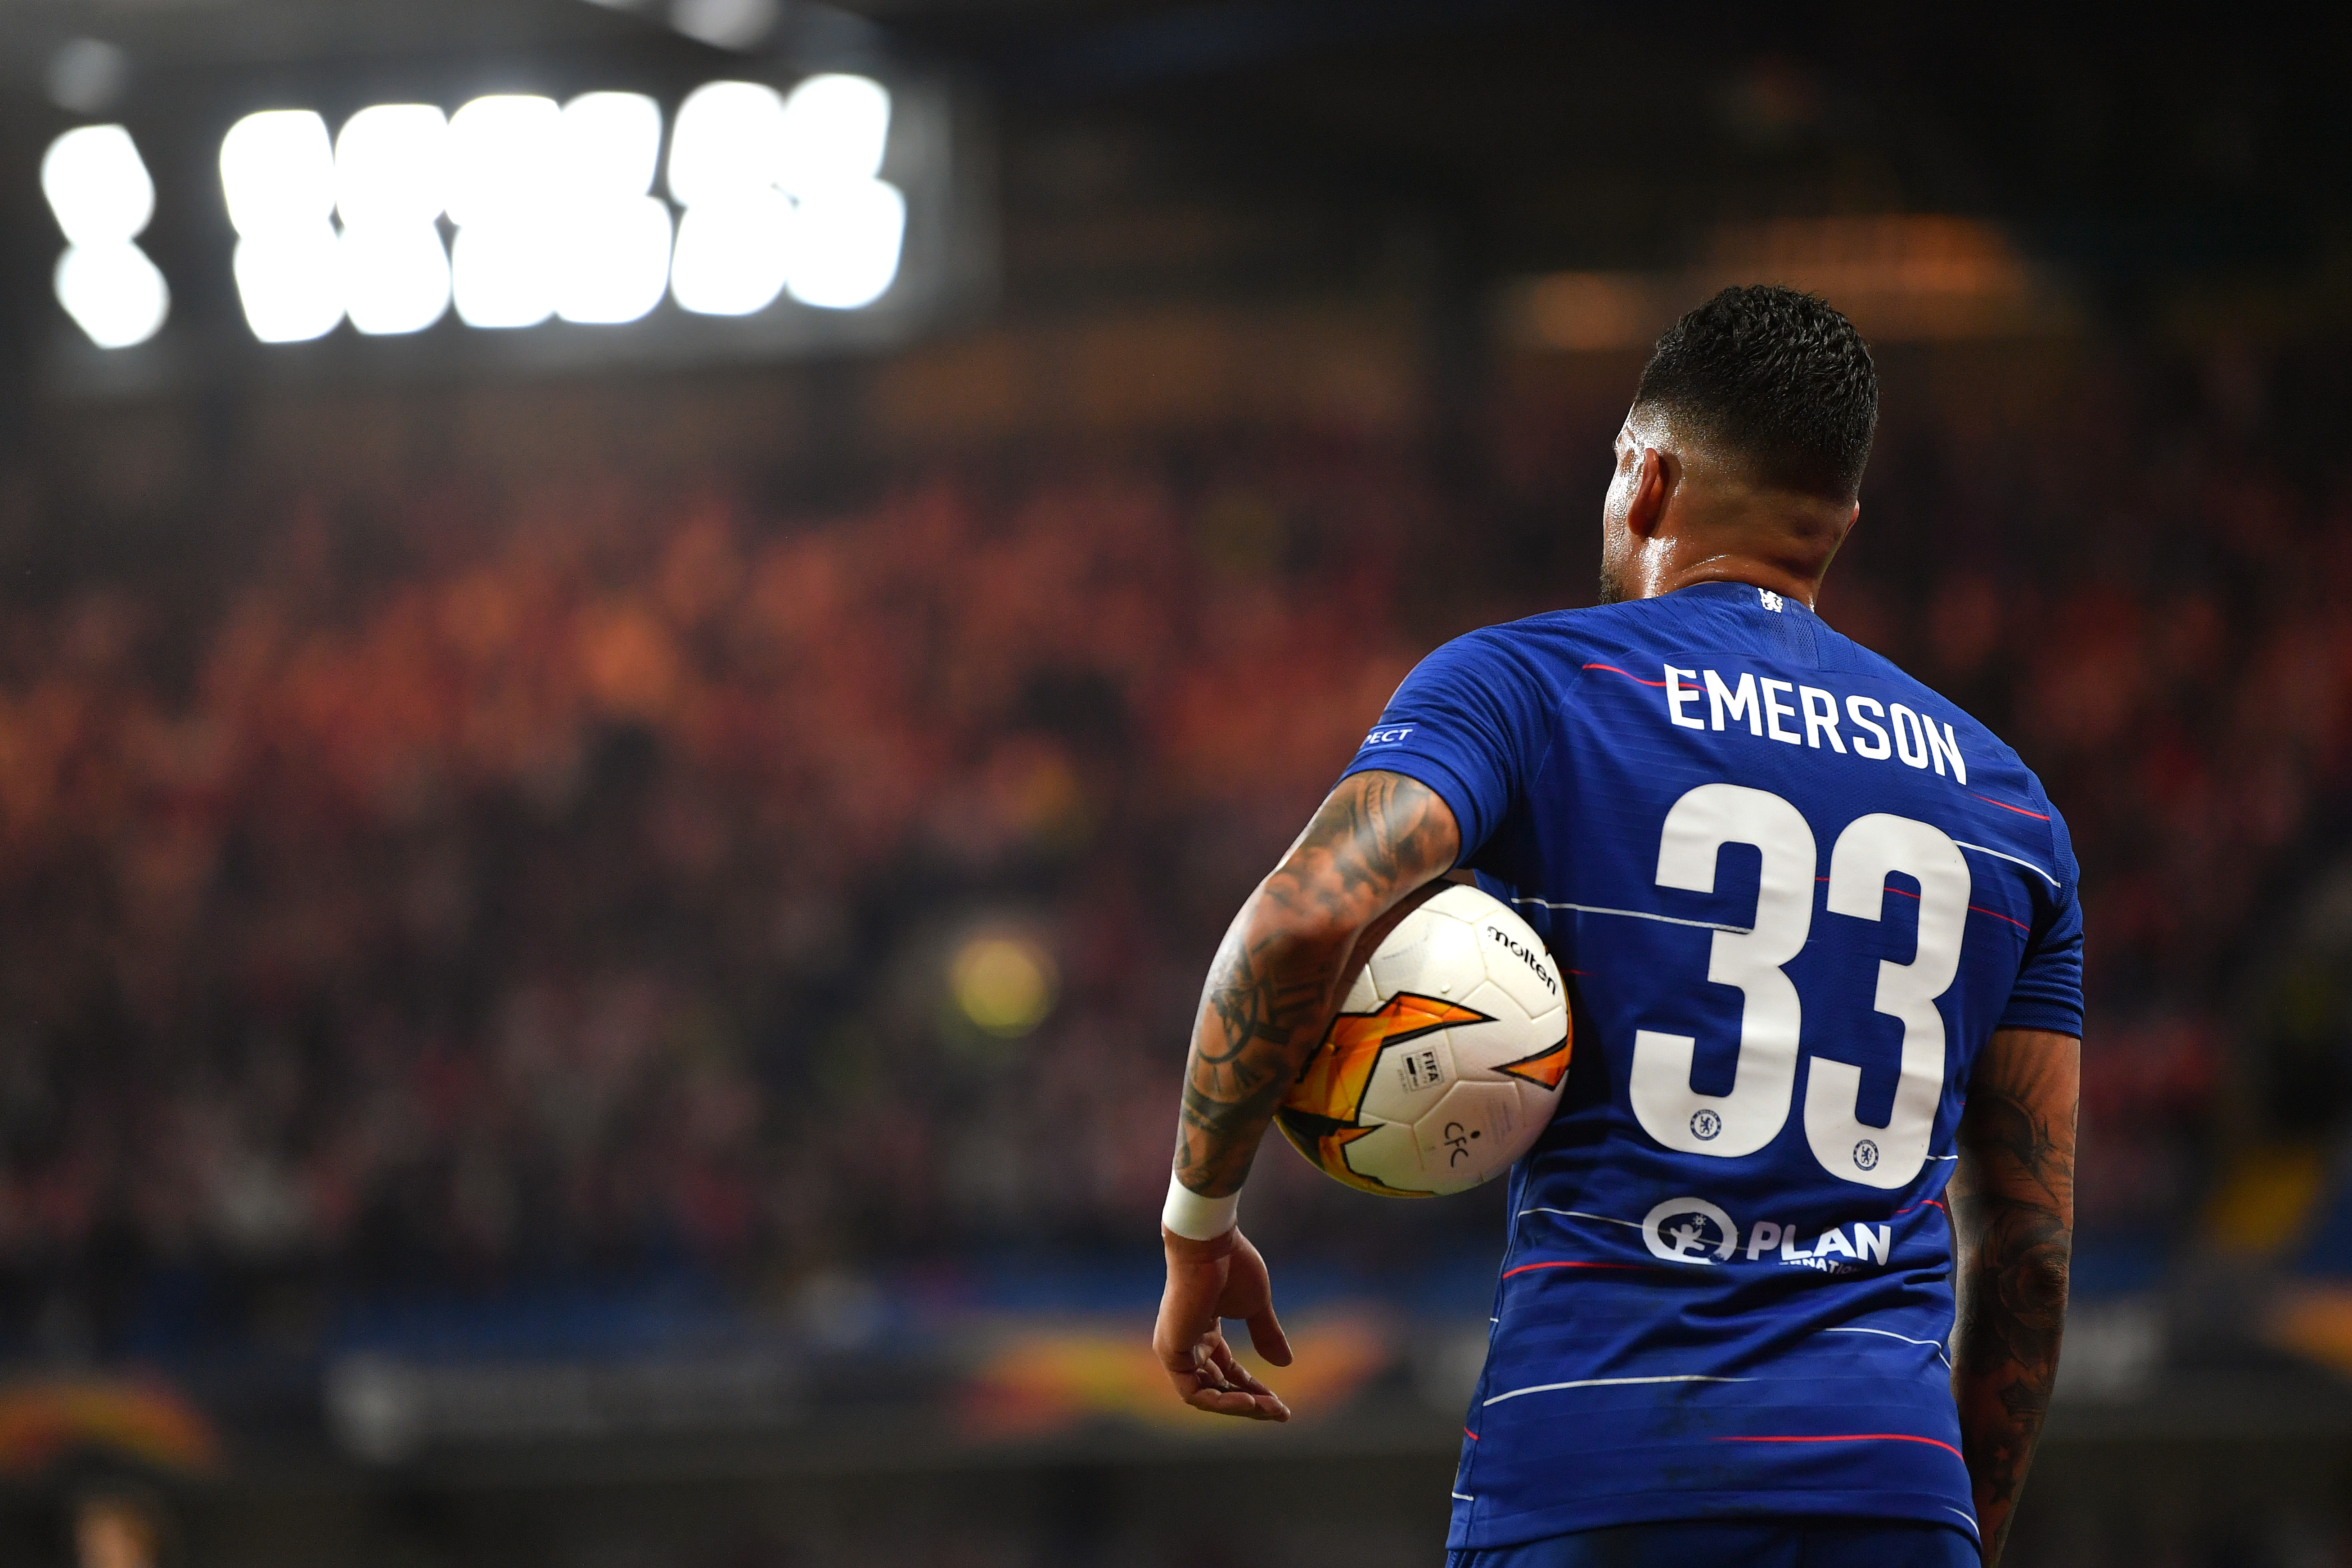 LONDON, ENGLAND - APRIL 18: Emerson Palmieri of Chelsea prepares for a throw in during the UEFA Europa League Quarter Final Second Leg match between Chelsea and Slavia Praha at Stamford Bridge on April 18, 2019 in London, England. (Photo by Dan Mullan/Getty Images)